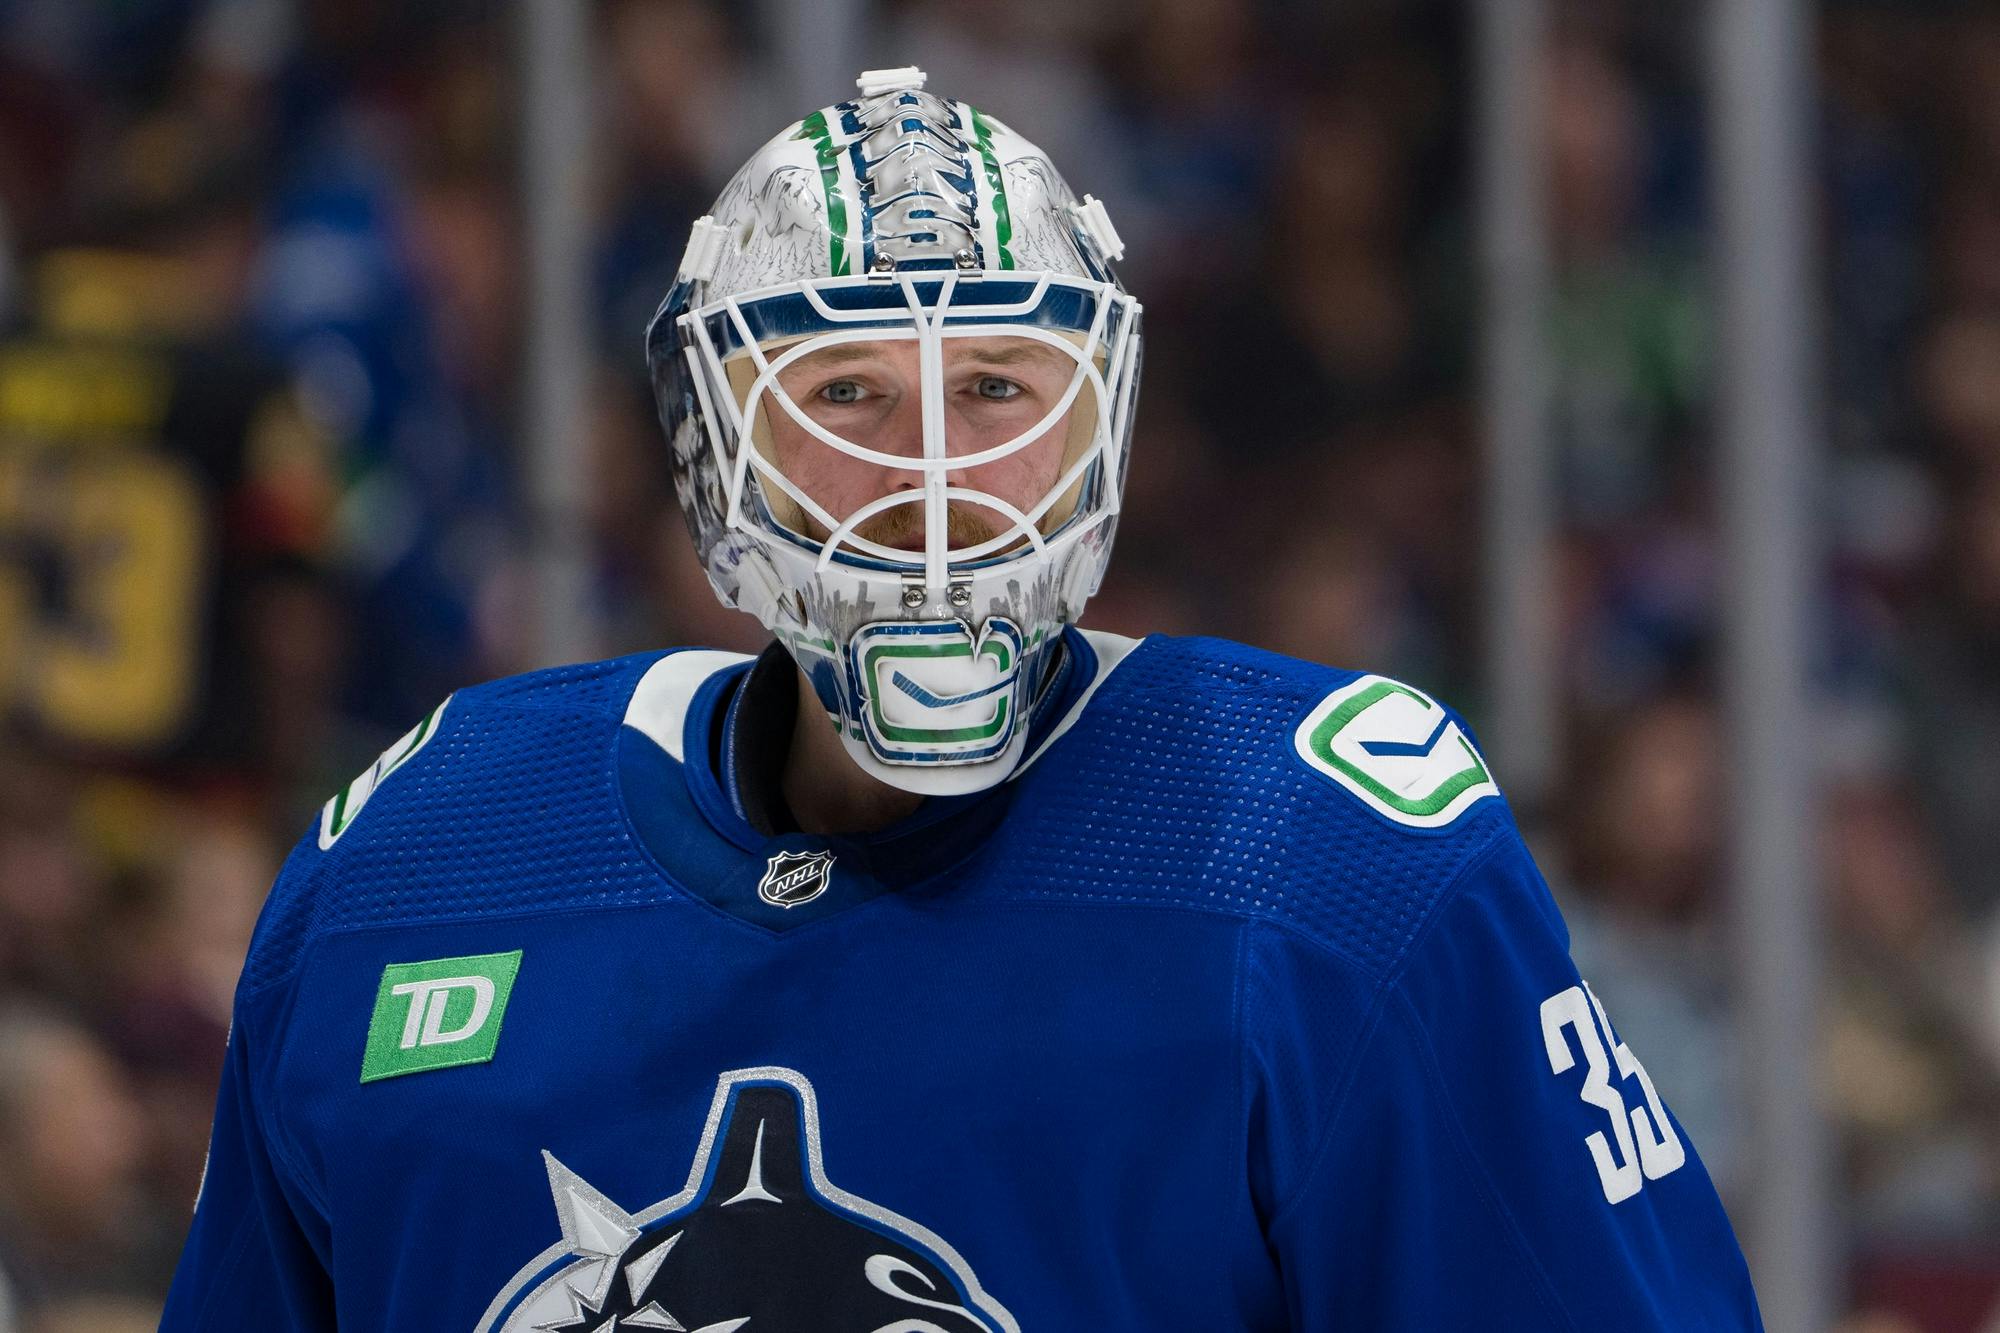 Demko to represent Canucks at his first NHL All-Star Game